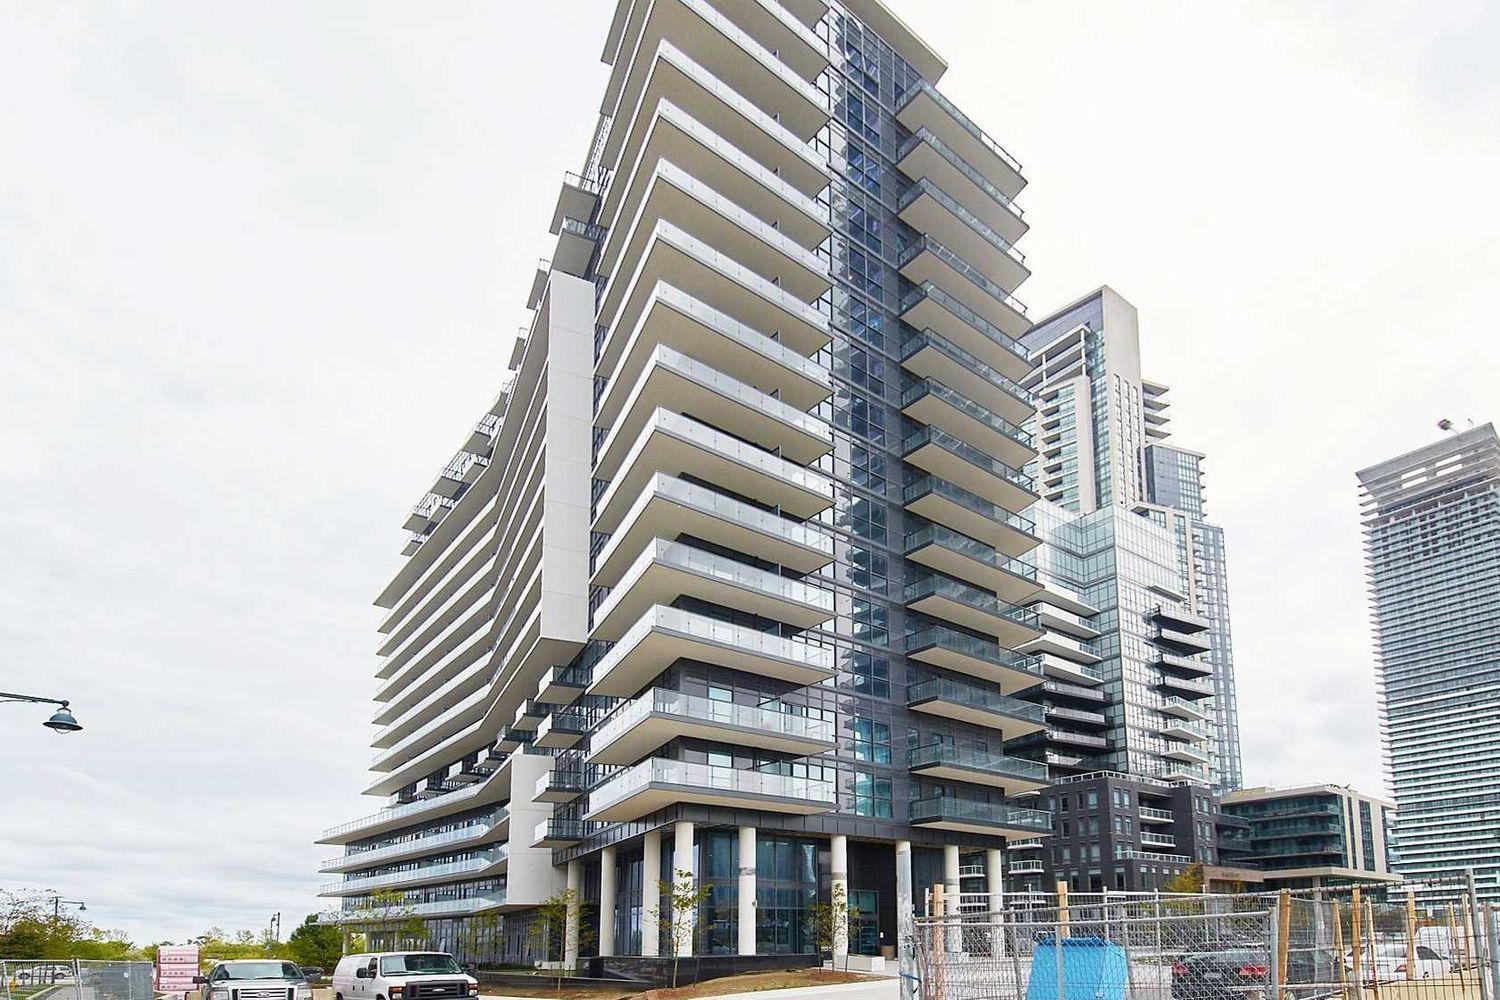 39 Annie Craig Drive. Cove at Waterways Condos  is located in  Etobicoke, Toronto - image #1 of 3